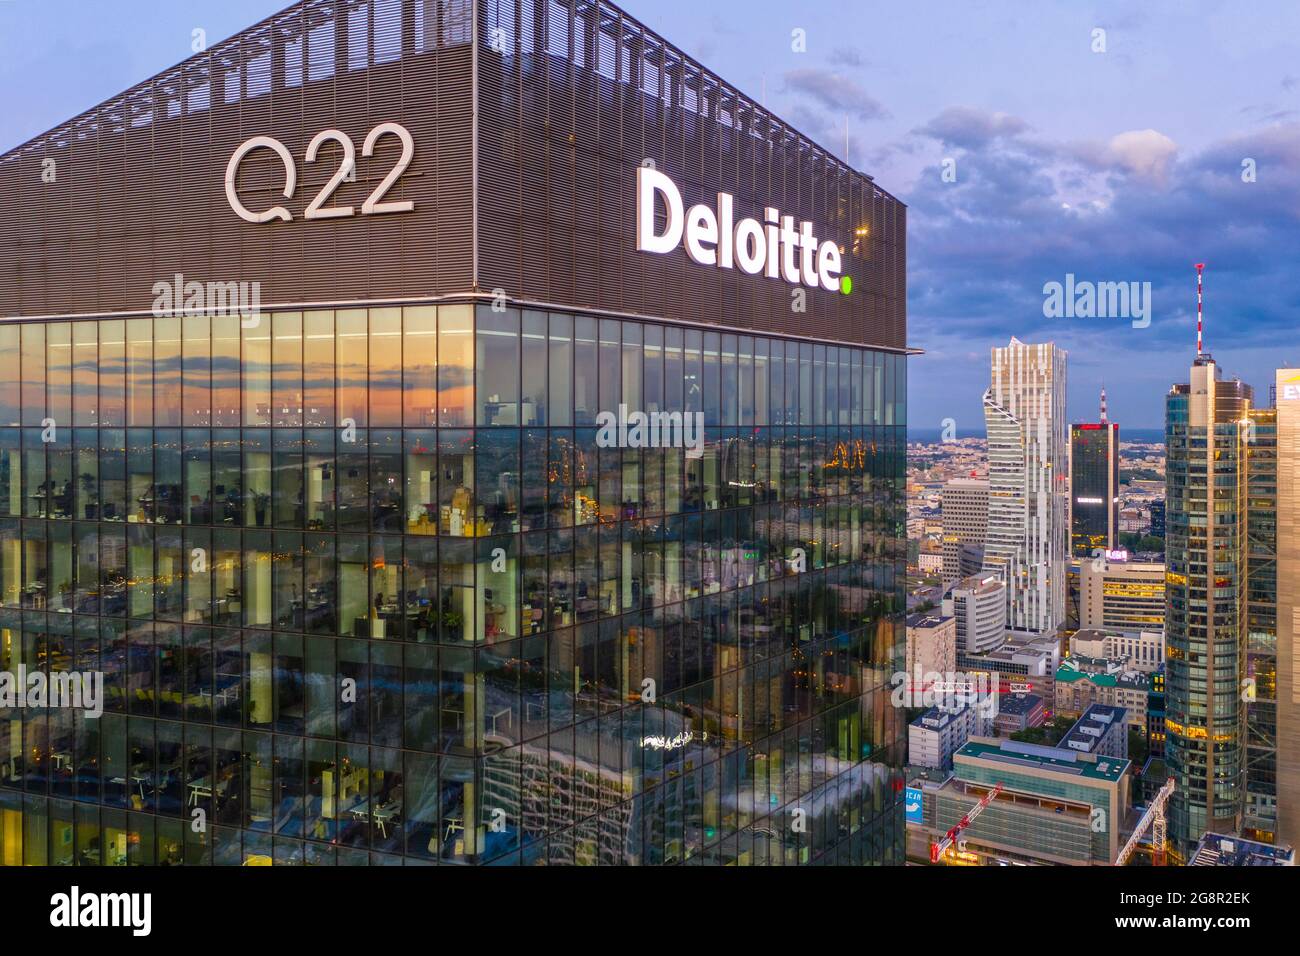 Aerial view of Q22 Deloitte office building at sunset Stock Photo - Alamy